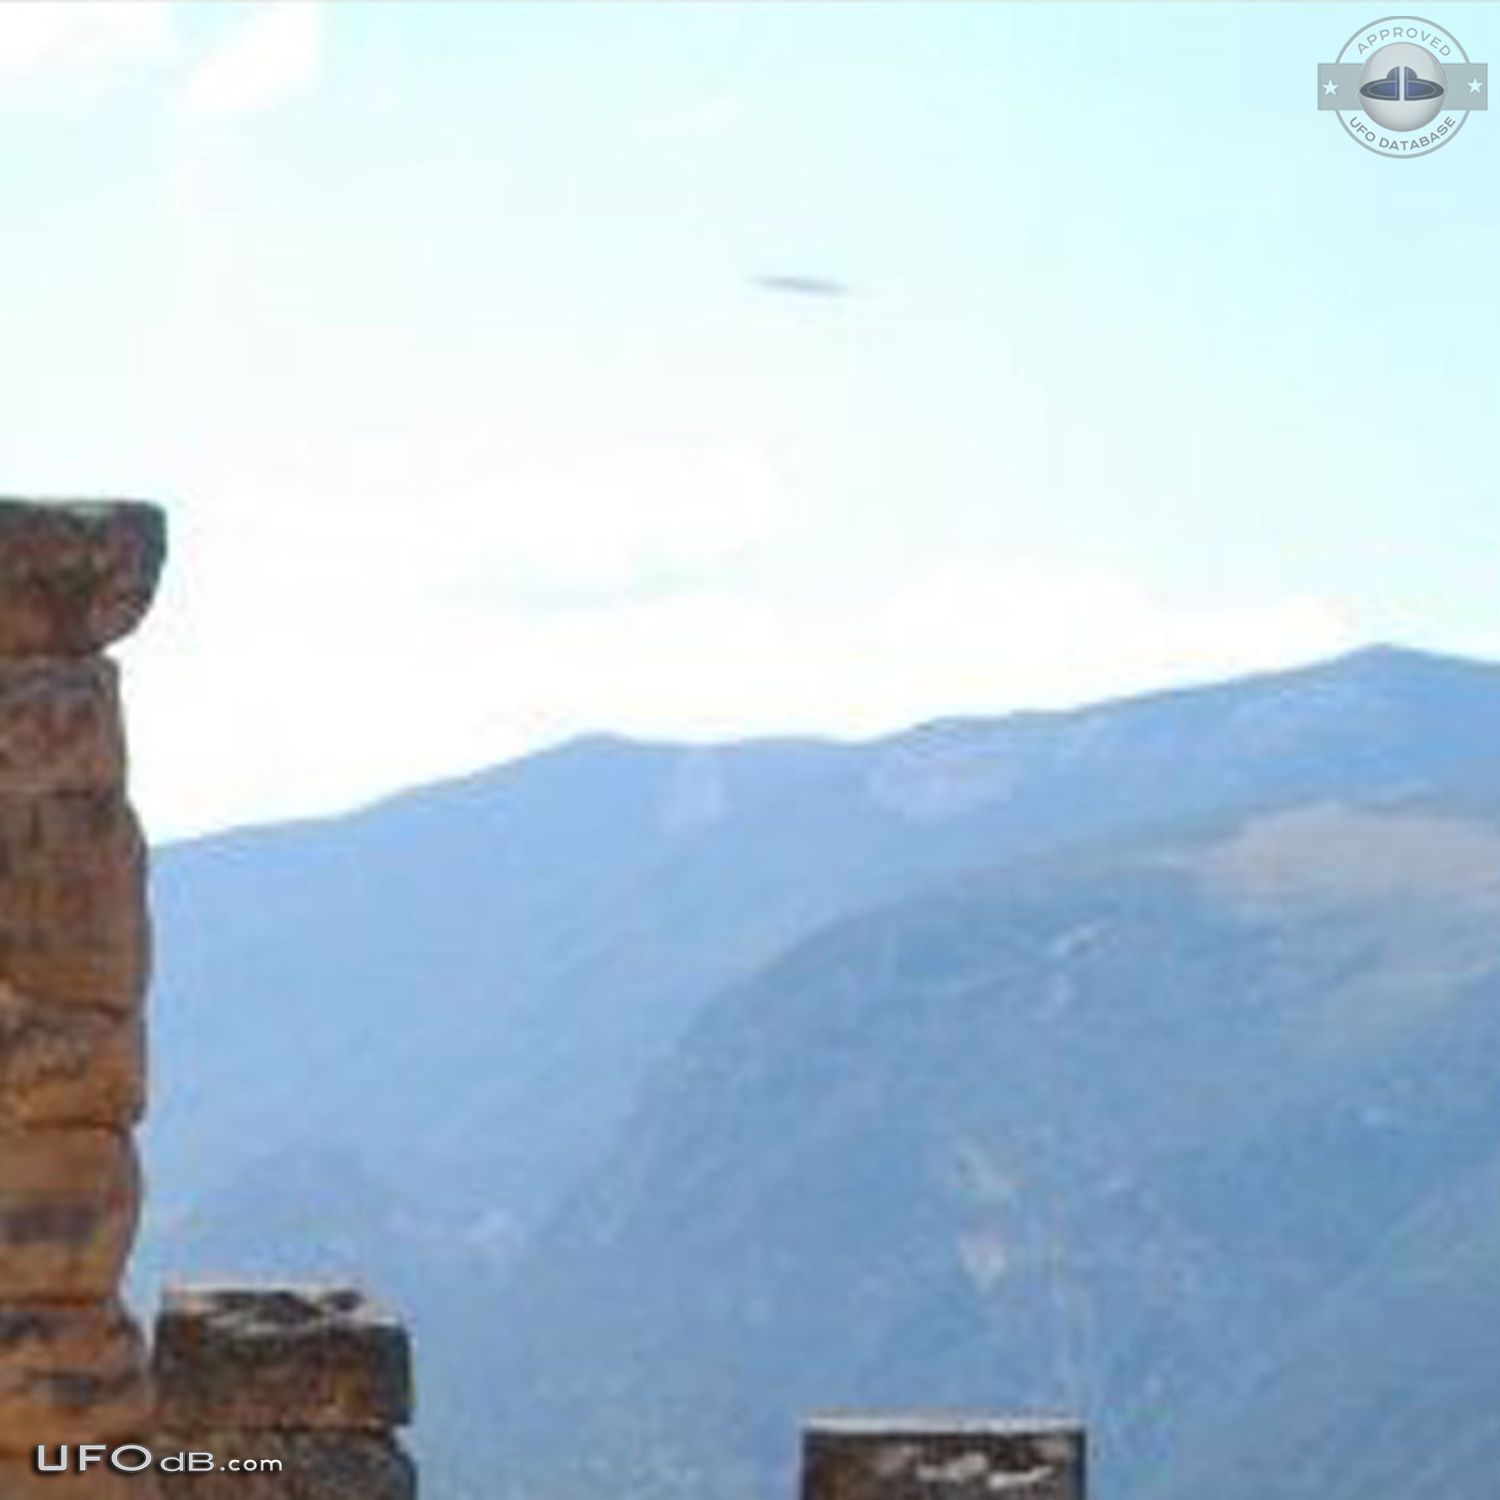 UFO picture showing saucer near Delphi Greece caught in June 3 2012 UFO Picture #449-3